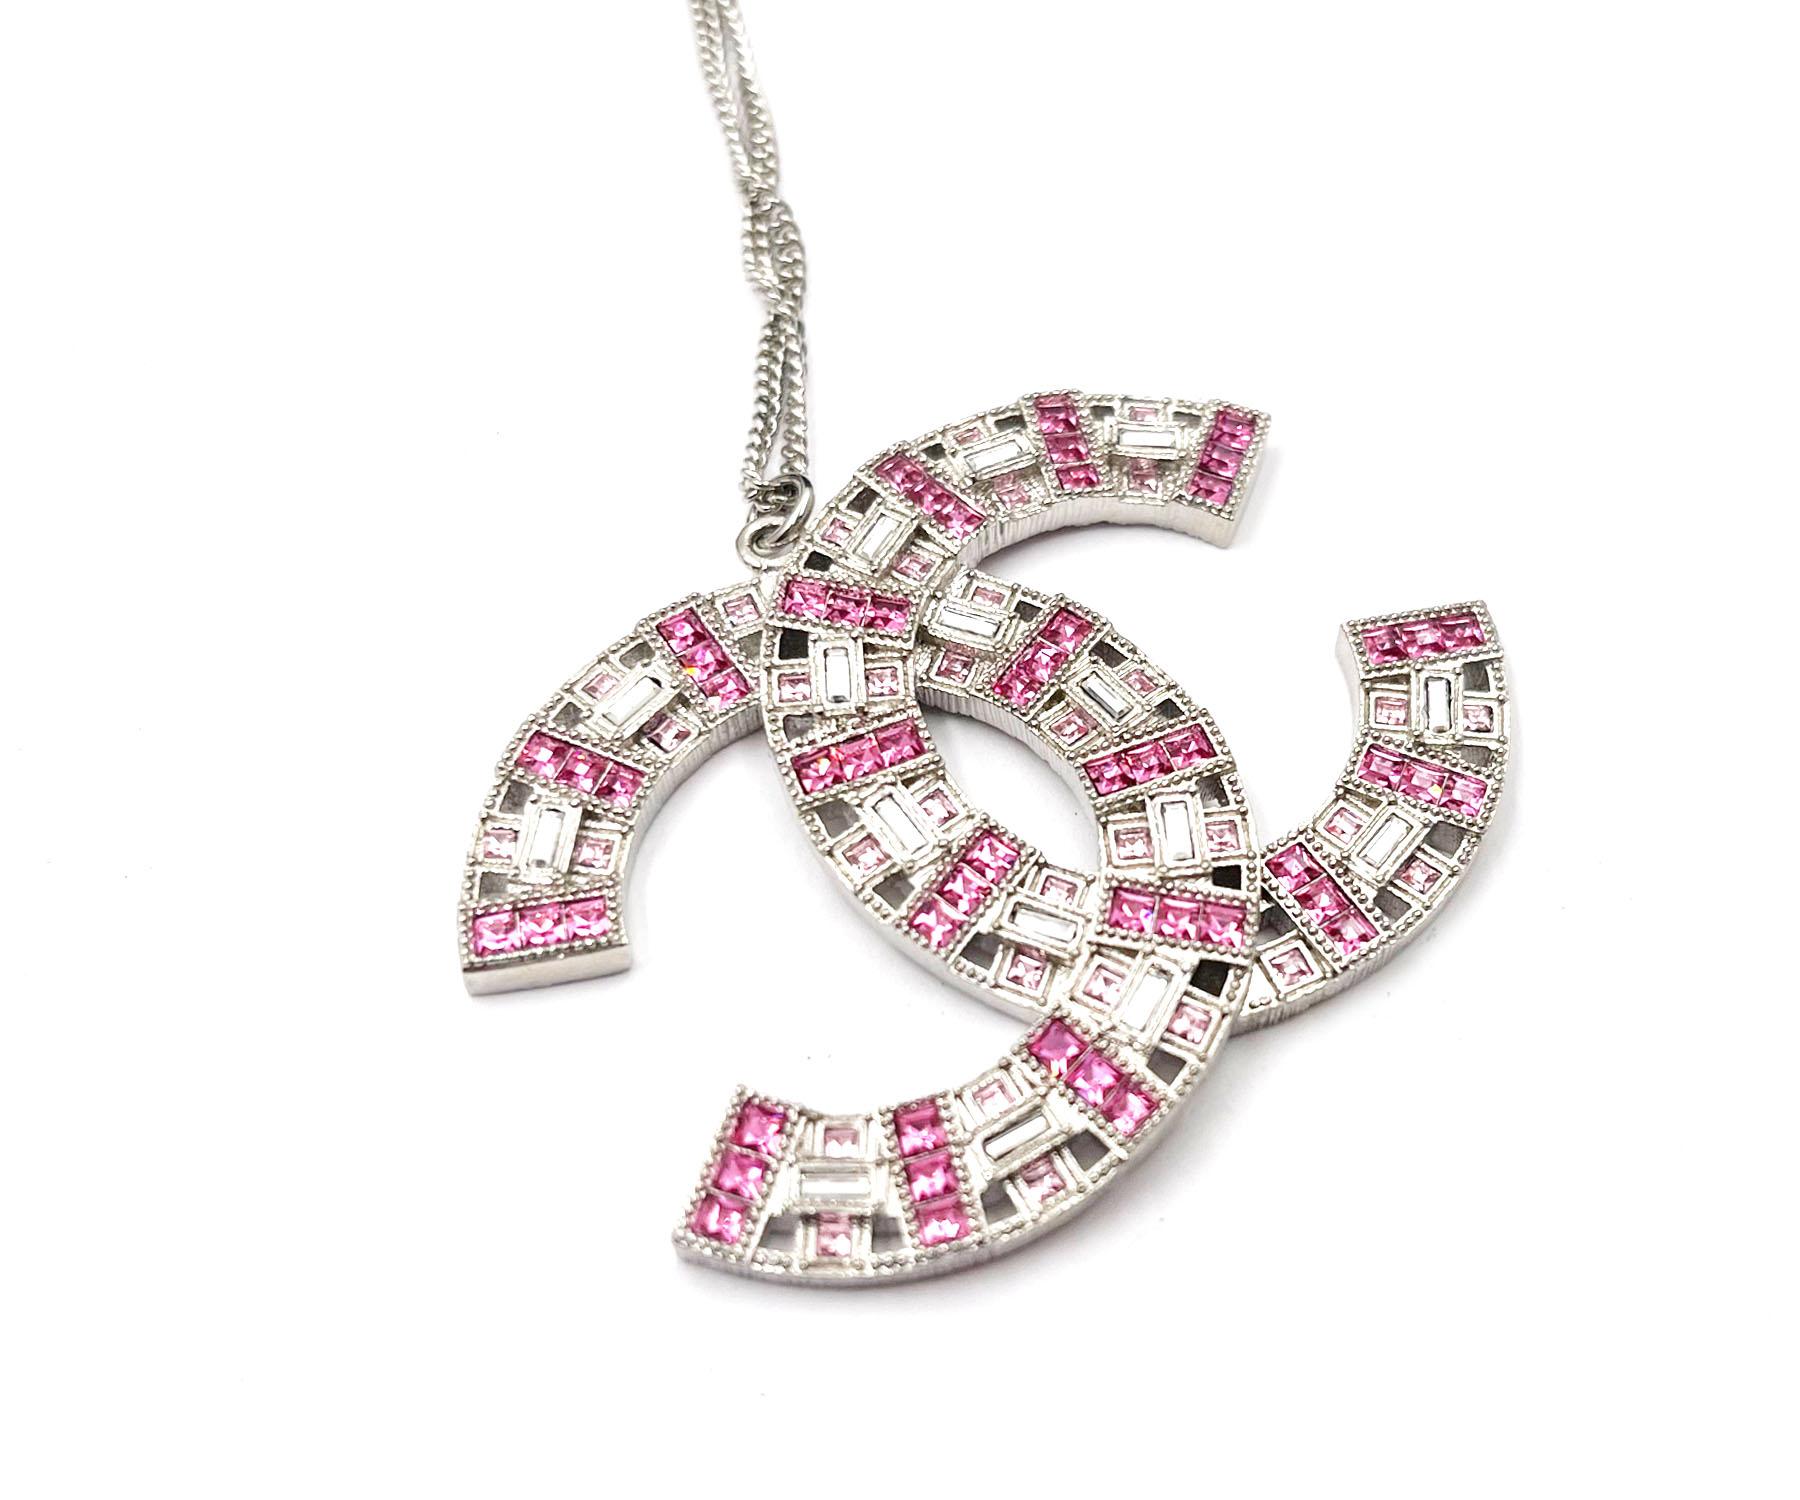 Chanel Silver CC Pink Baguette Crystal Large Pendant Necklace   In Excellent Condition For Sale In Pasadena, CA